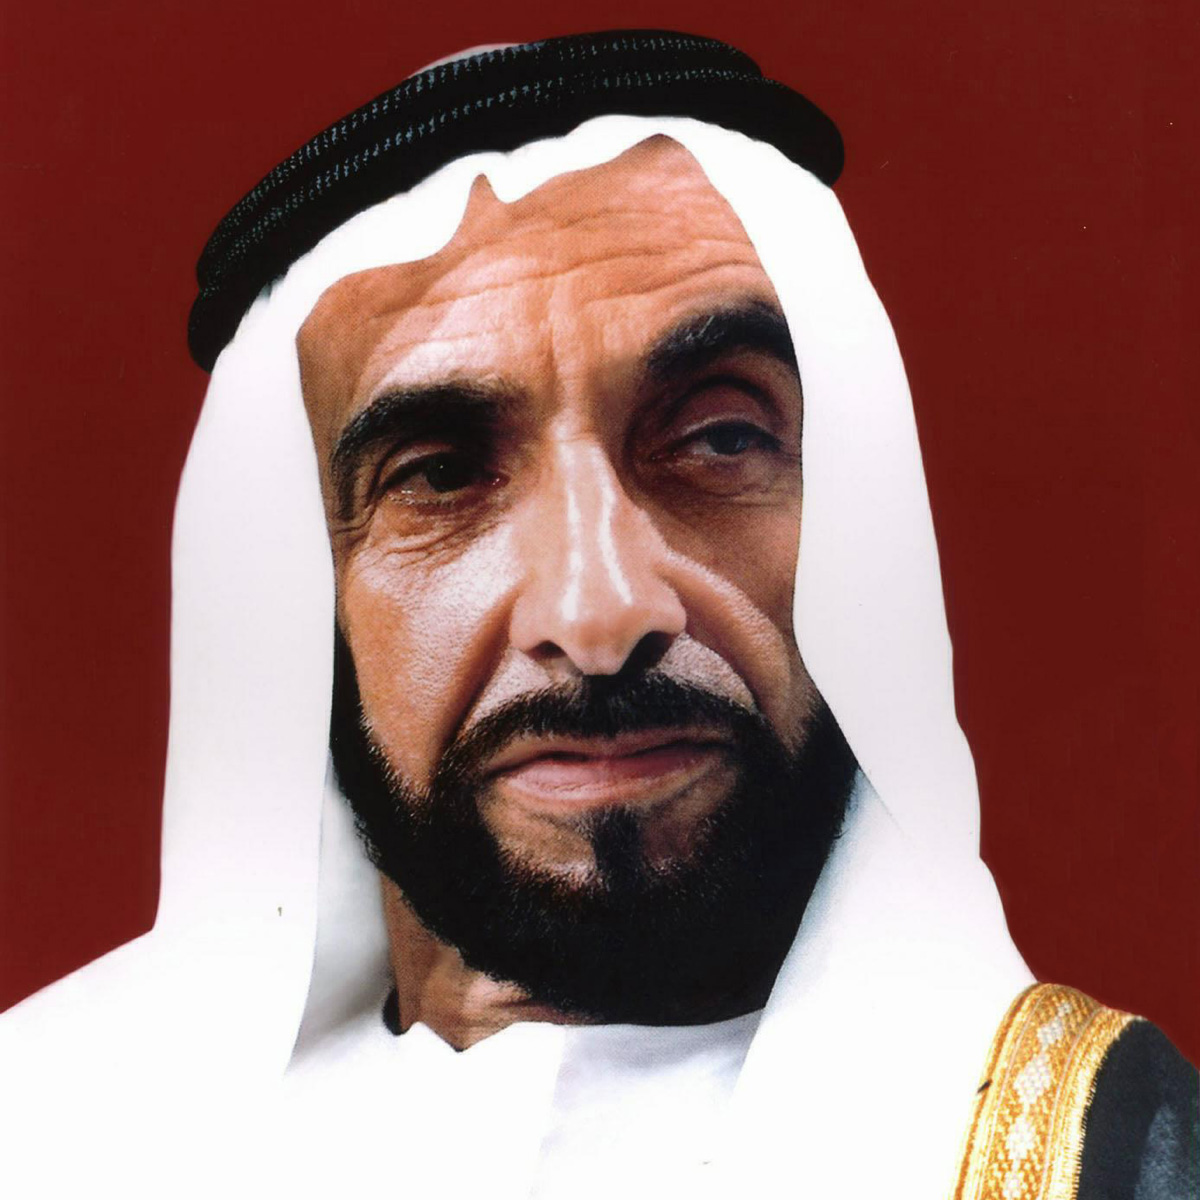 Zayed bin Sultan Al Nahyan's Death - Cause and Date - The Celebrity Deaths